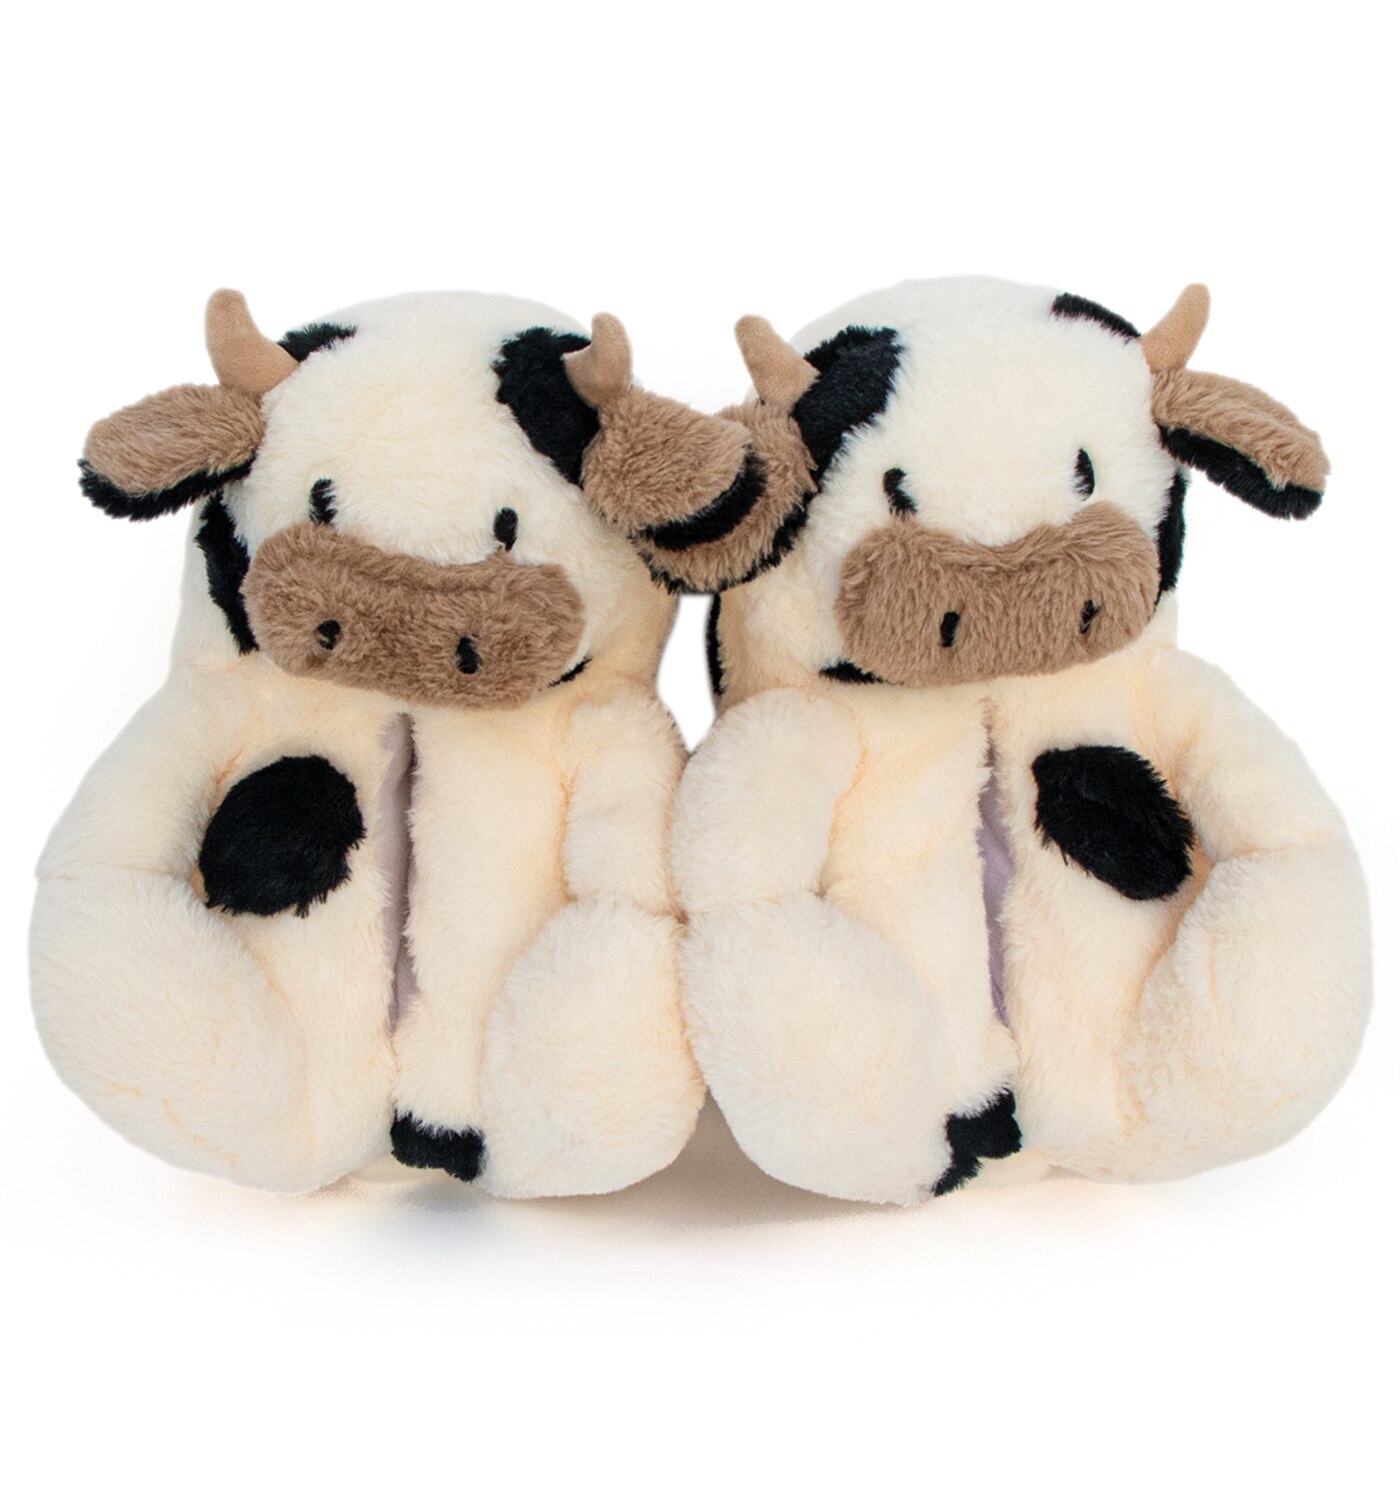 Cute Warm Fuzzy House Animal Slippers